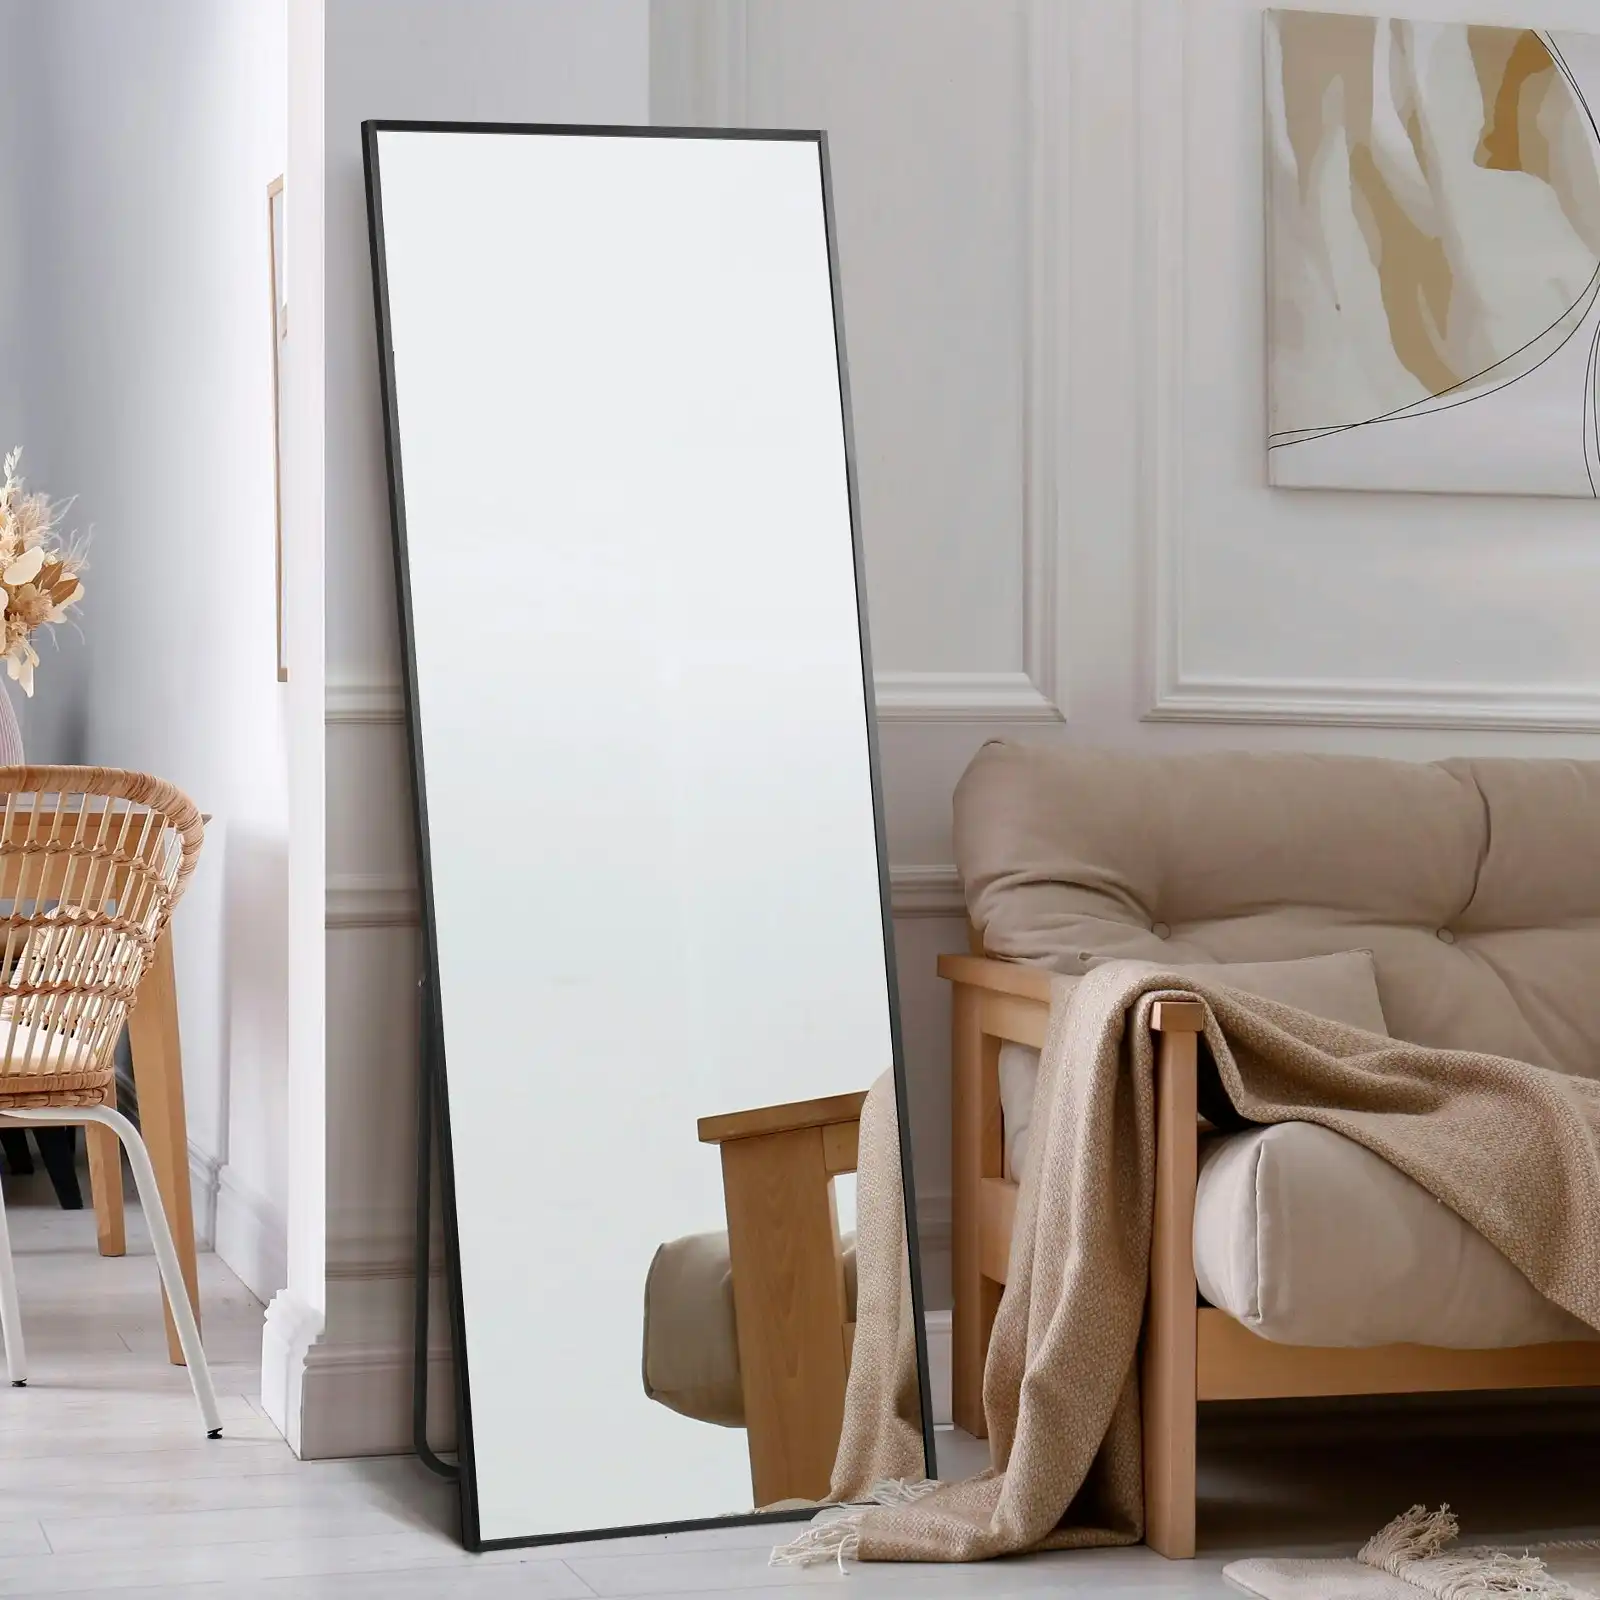 Oikiture 166x60cm Full Length Mirror Rectangle Dressing Floor Mirrors Free Standing Black